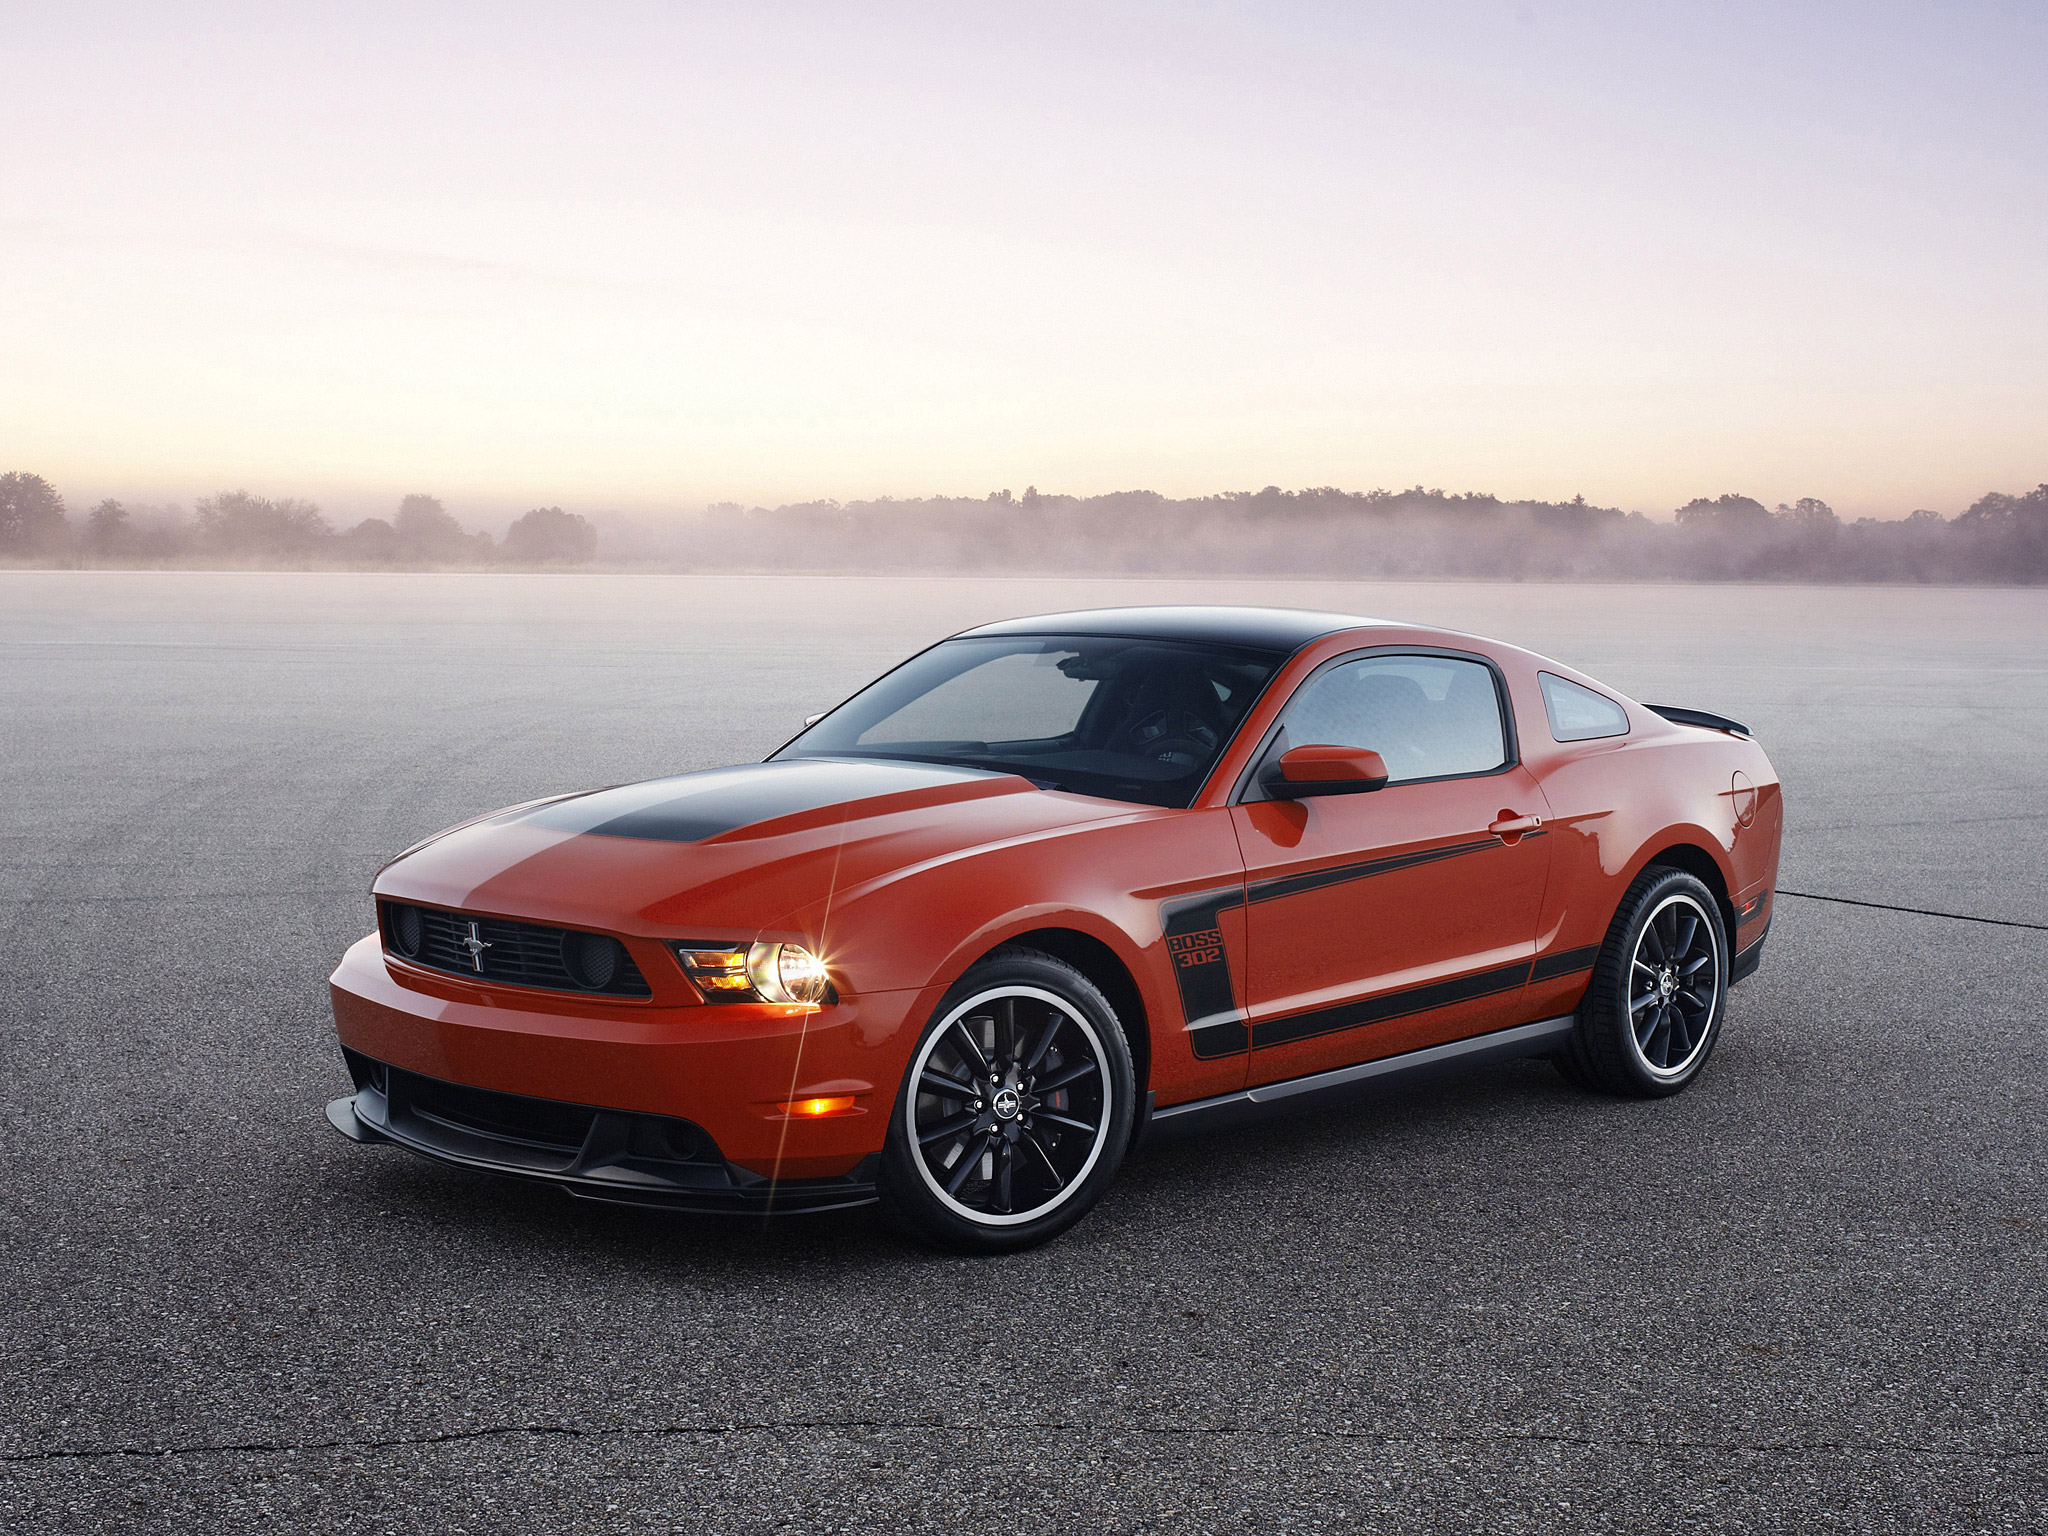 Mustang Of The Day: 2012 Ford Mustang Boss 302